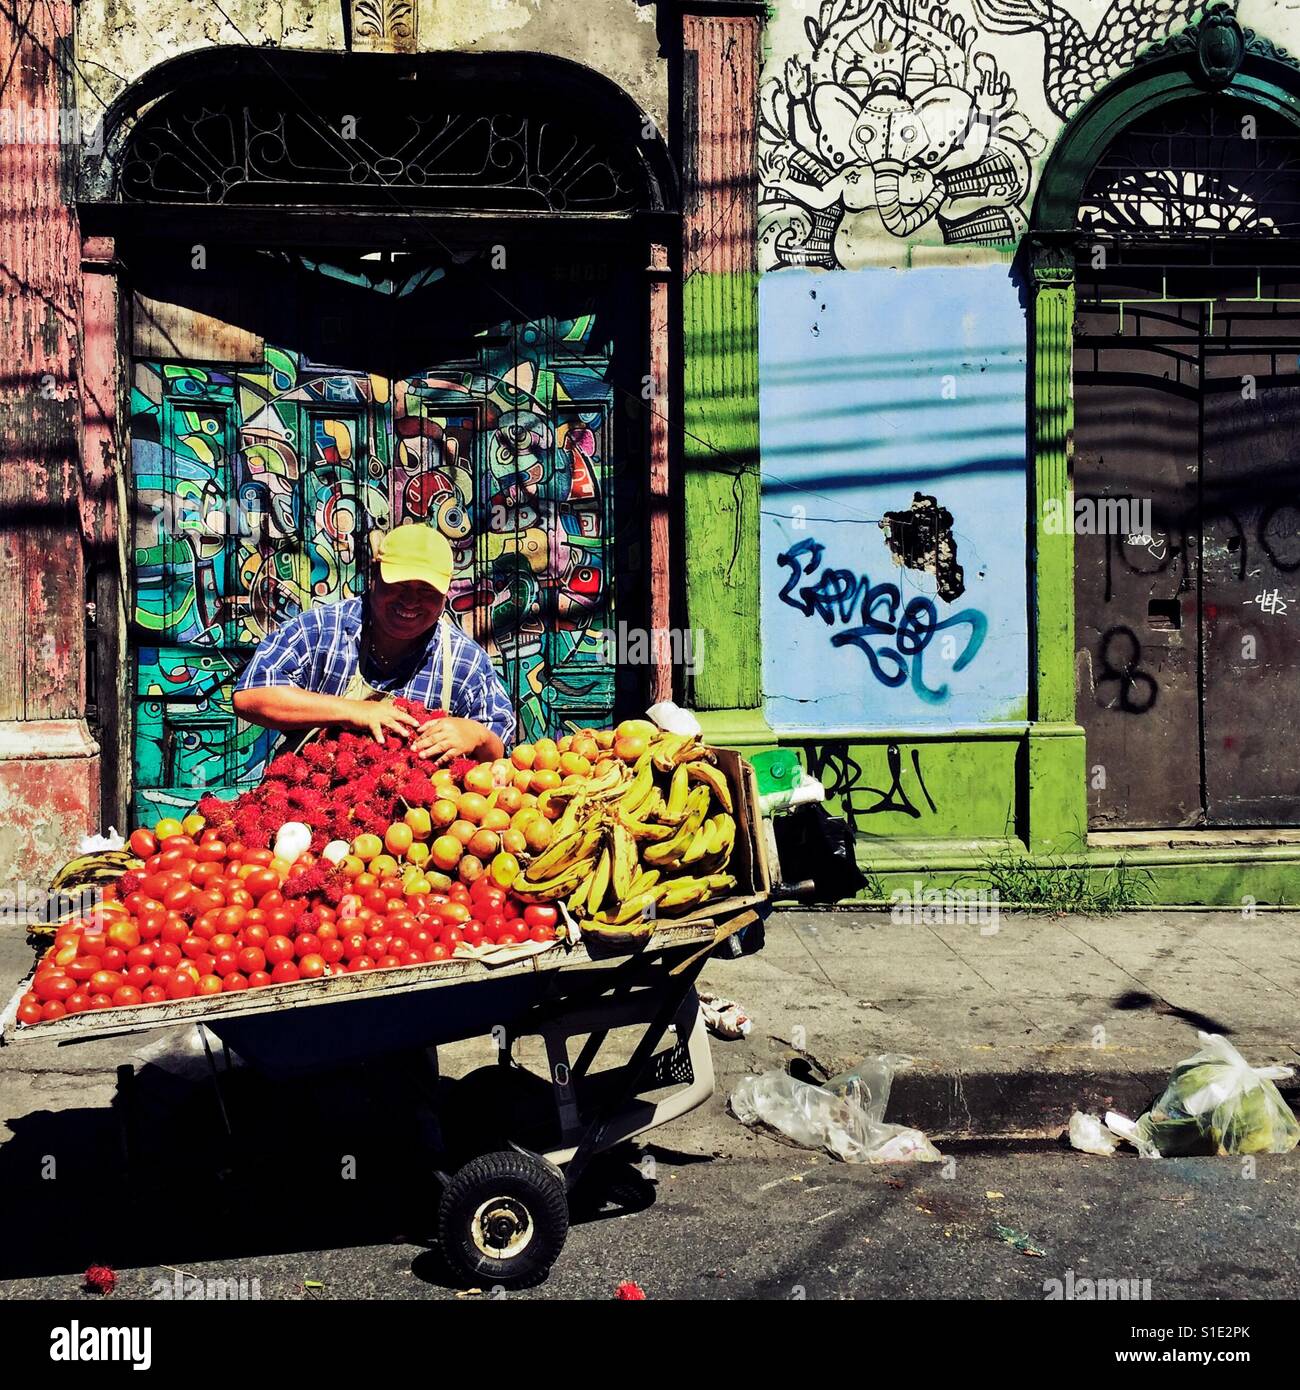 A Salvadoran man sells fruits in front of a ruined house with Spanish colonial architecture elements, painted over by a local artist, in the center of San Salvador, El Salvador, 12 November 2016. Stock Photo